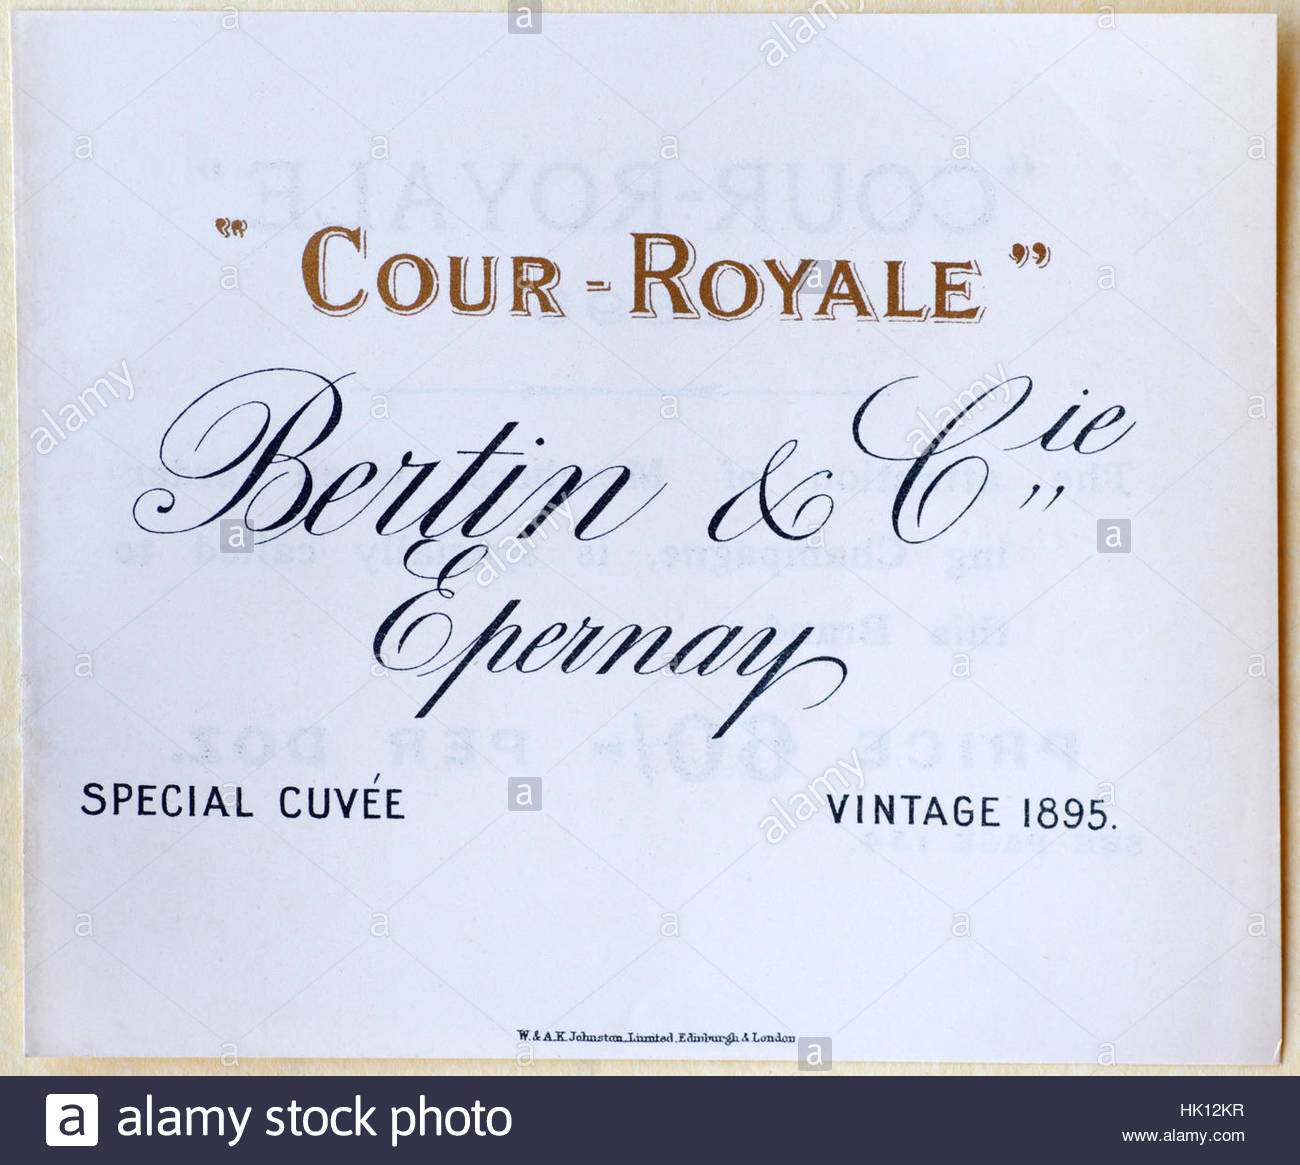 Cour Royale, original vintage advertising from circa 1900 Stock Photo